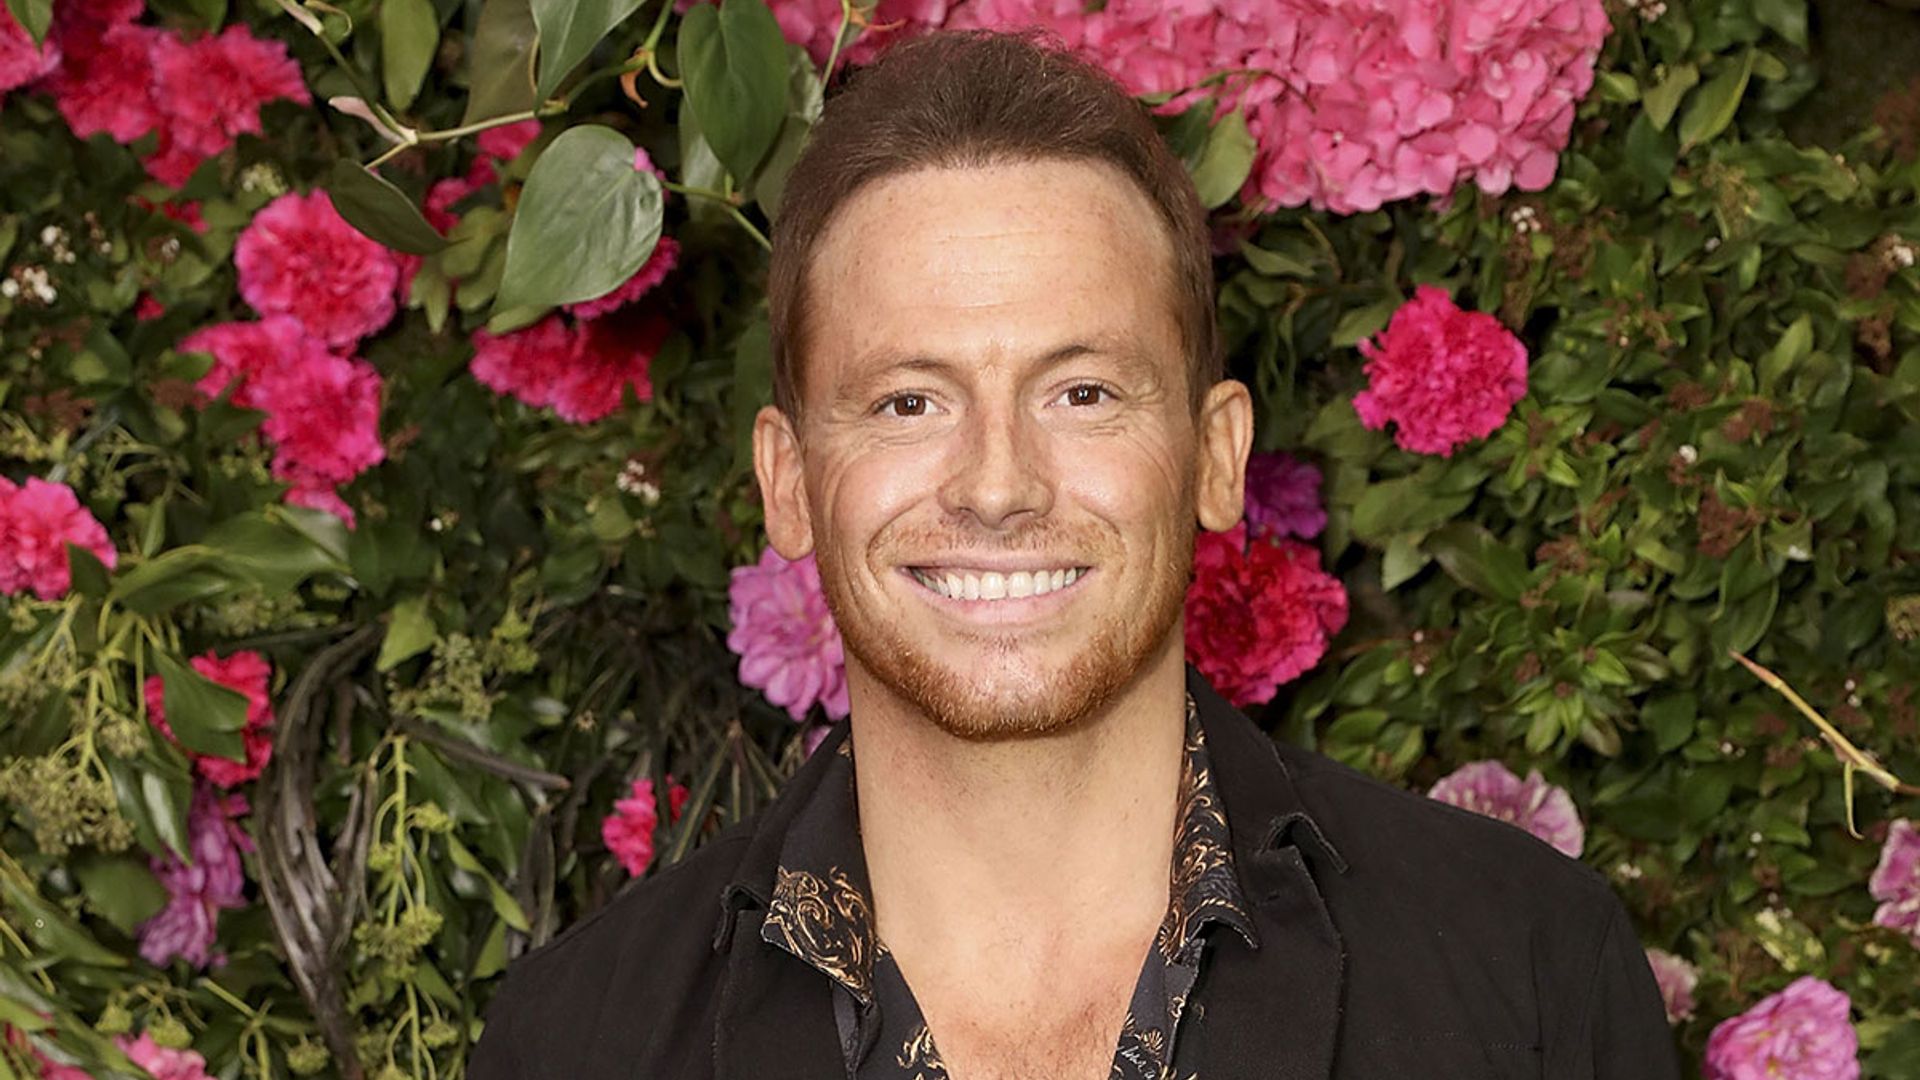 Joe Swash bakes what might be the most magical cake we've ever seen